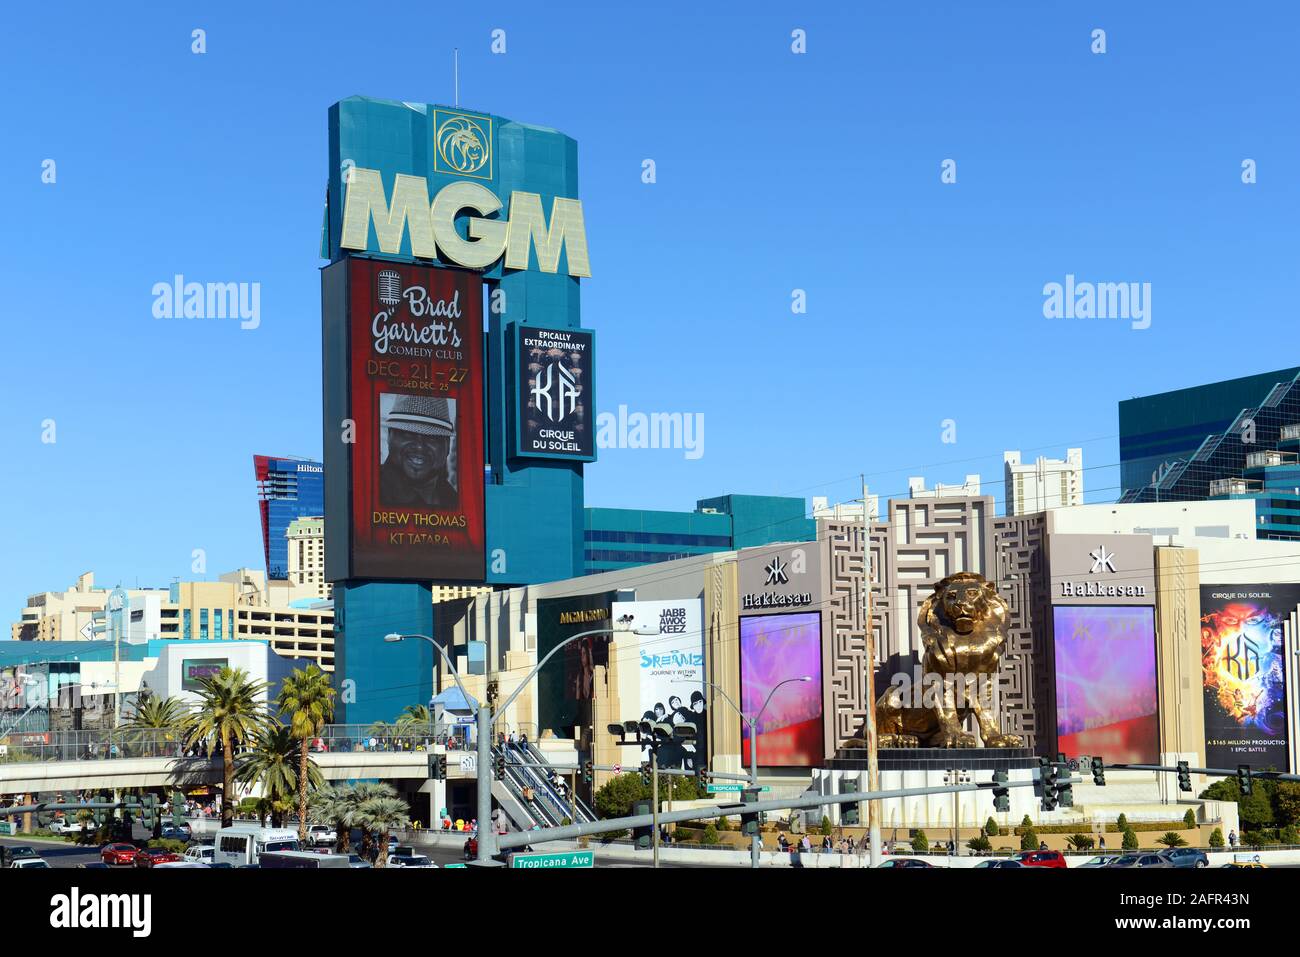 MGM Grand Las Vegas on Las Vegas Strip in Las Vegas, Nevada, USA. The hotel is the largest single hotel in the United States owned by MGM Resorts. Stock Photo